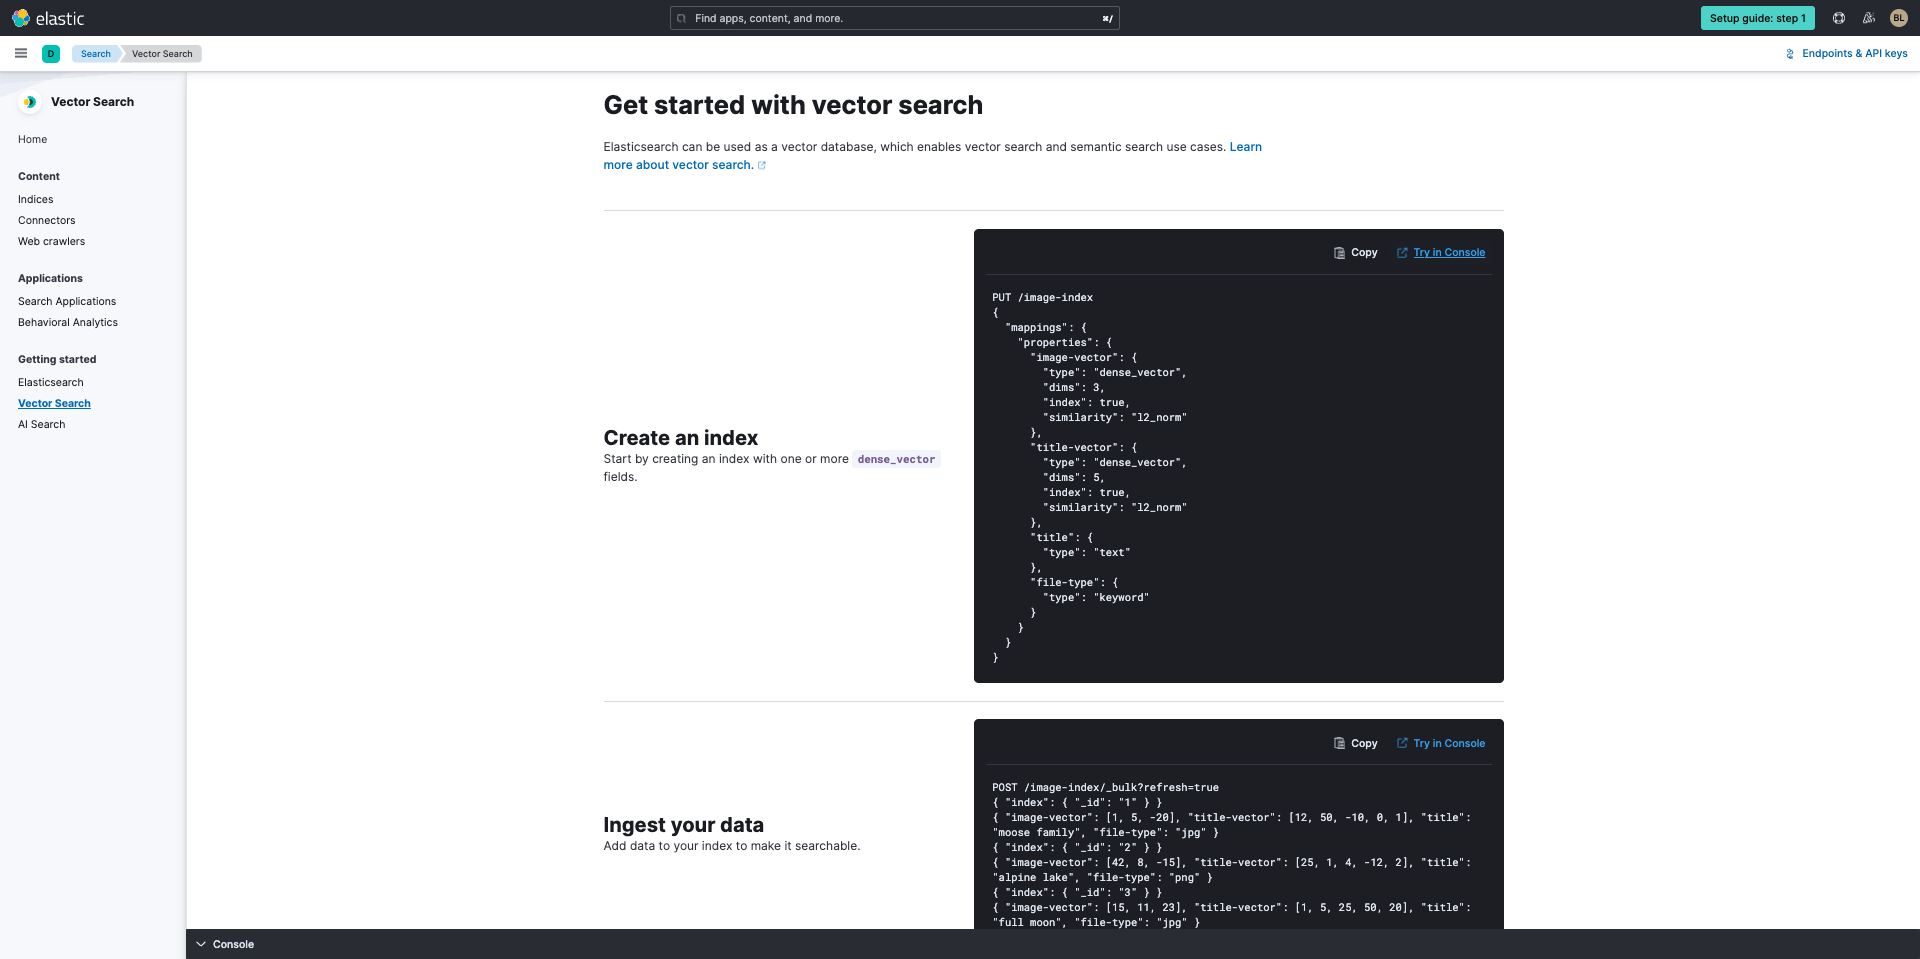 Vector_Search_in-product_guide_1.png